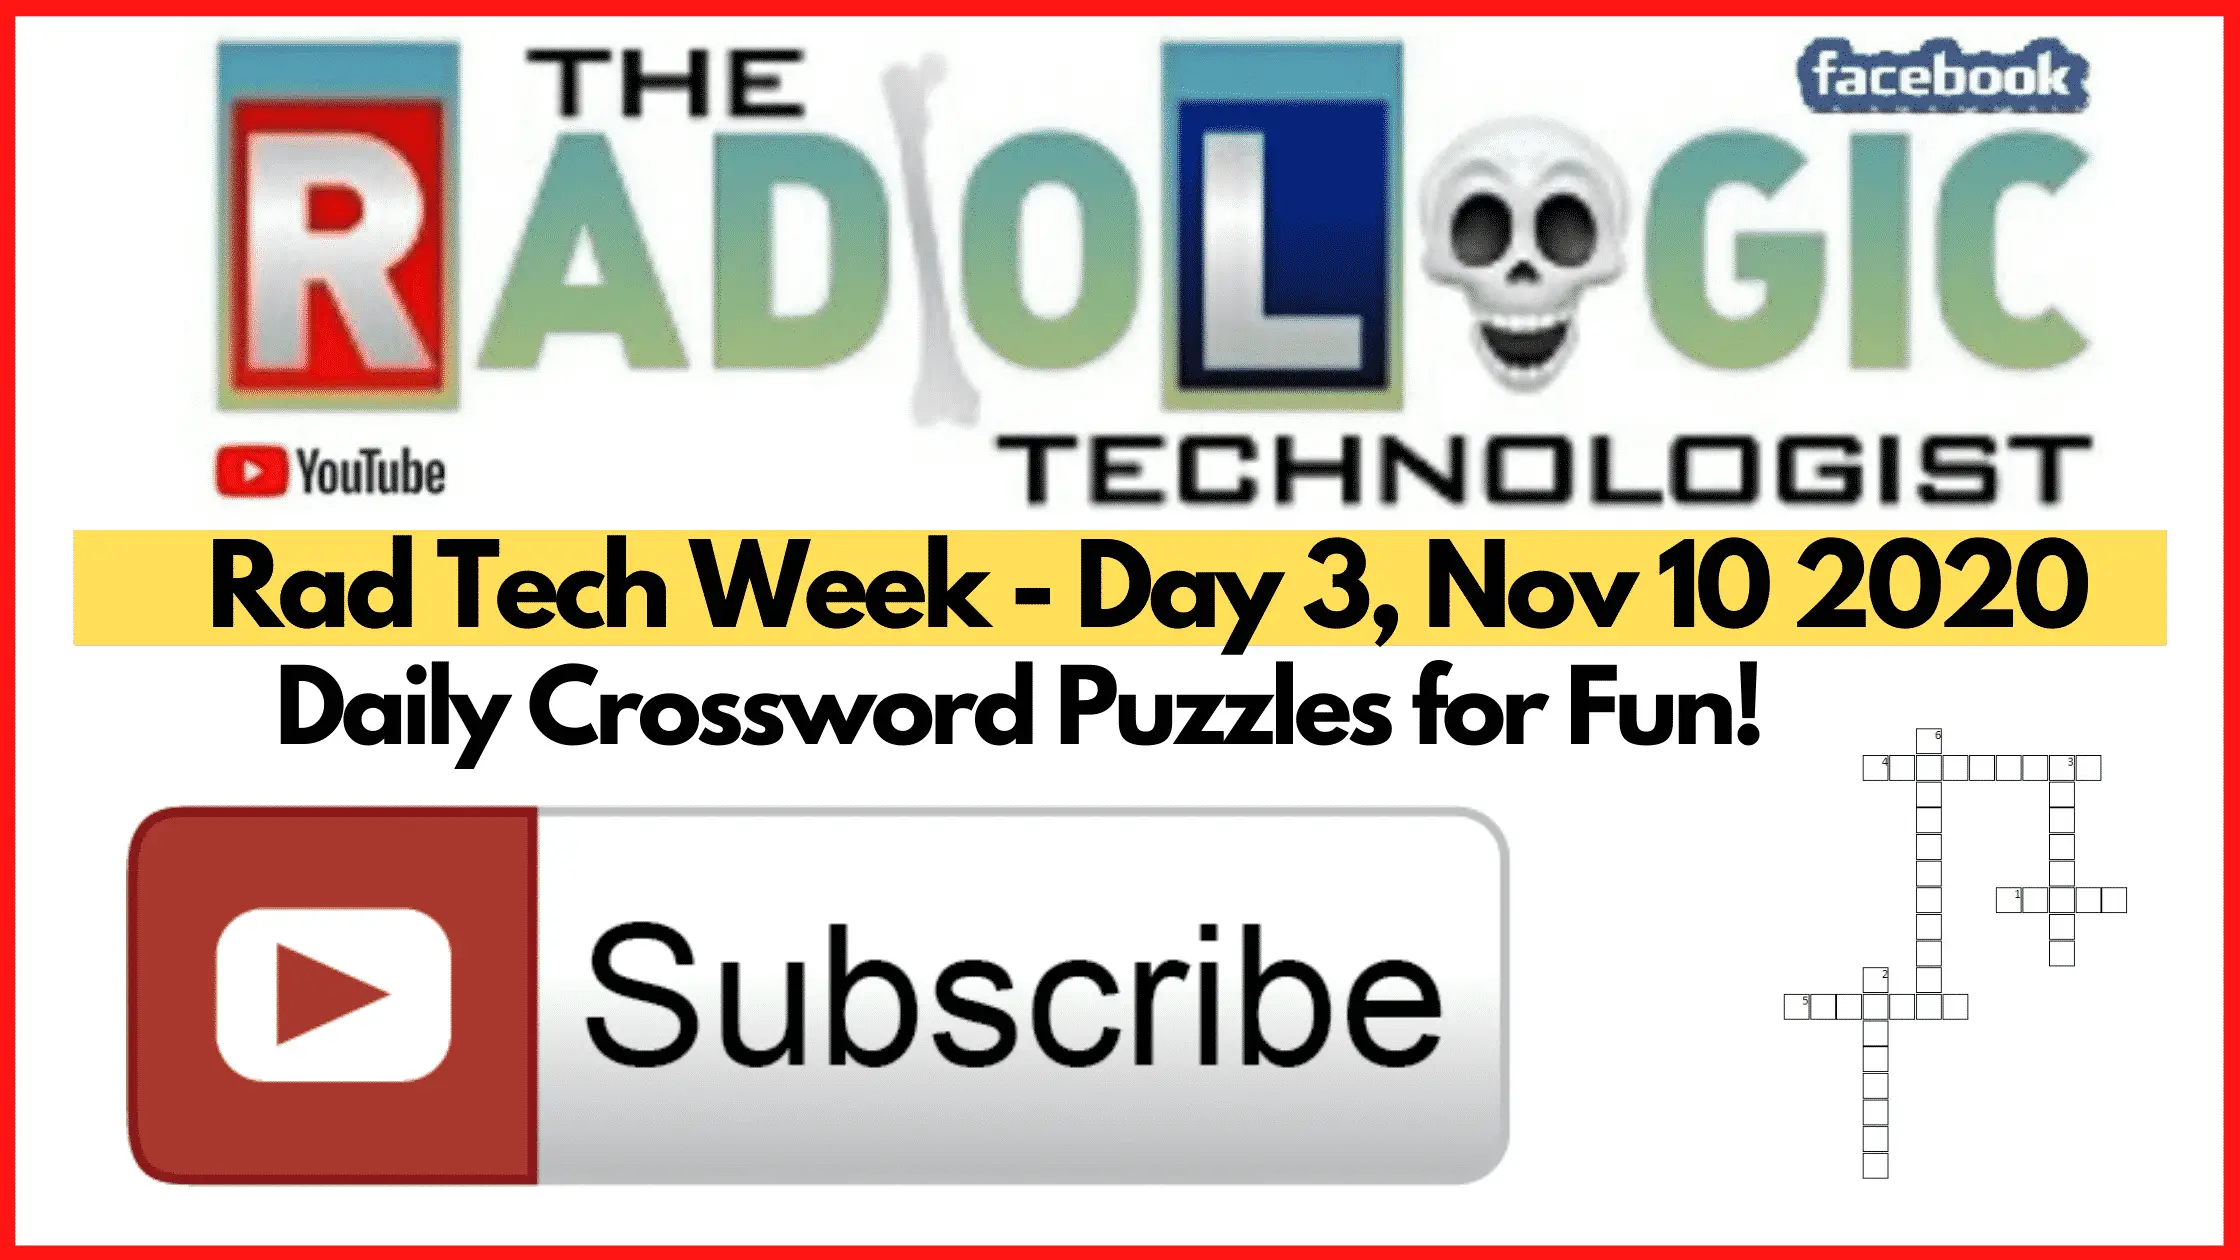 Rad Tech Week 2020 Crossword Puzzle - Day 3 of 7, Types of PPE